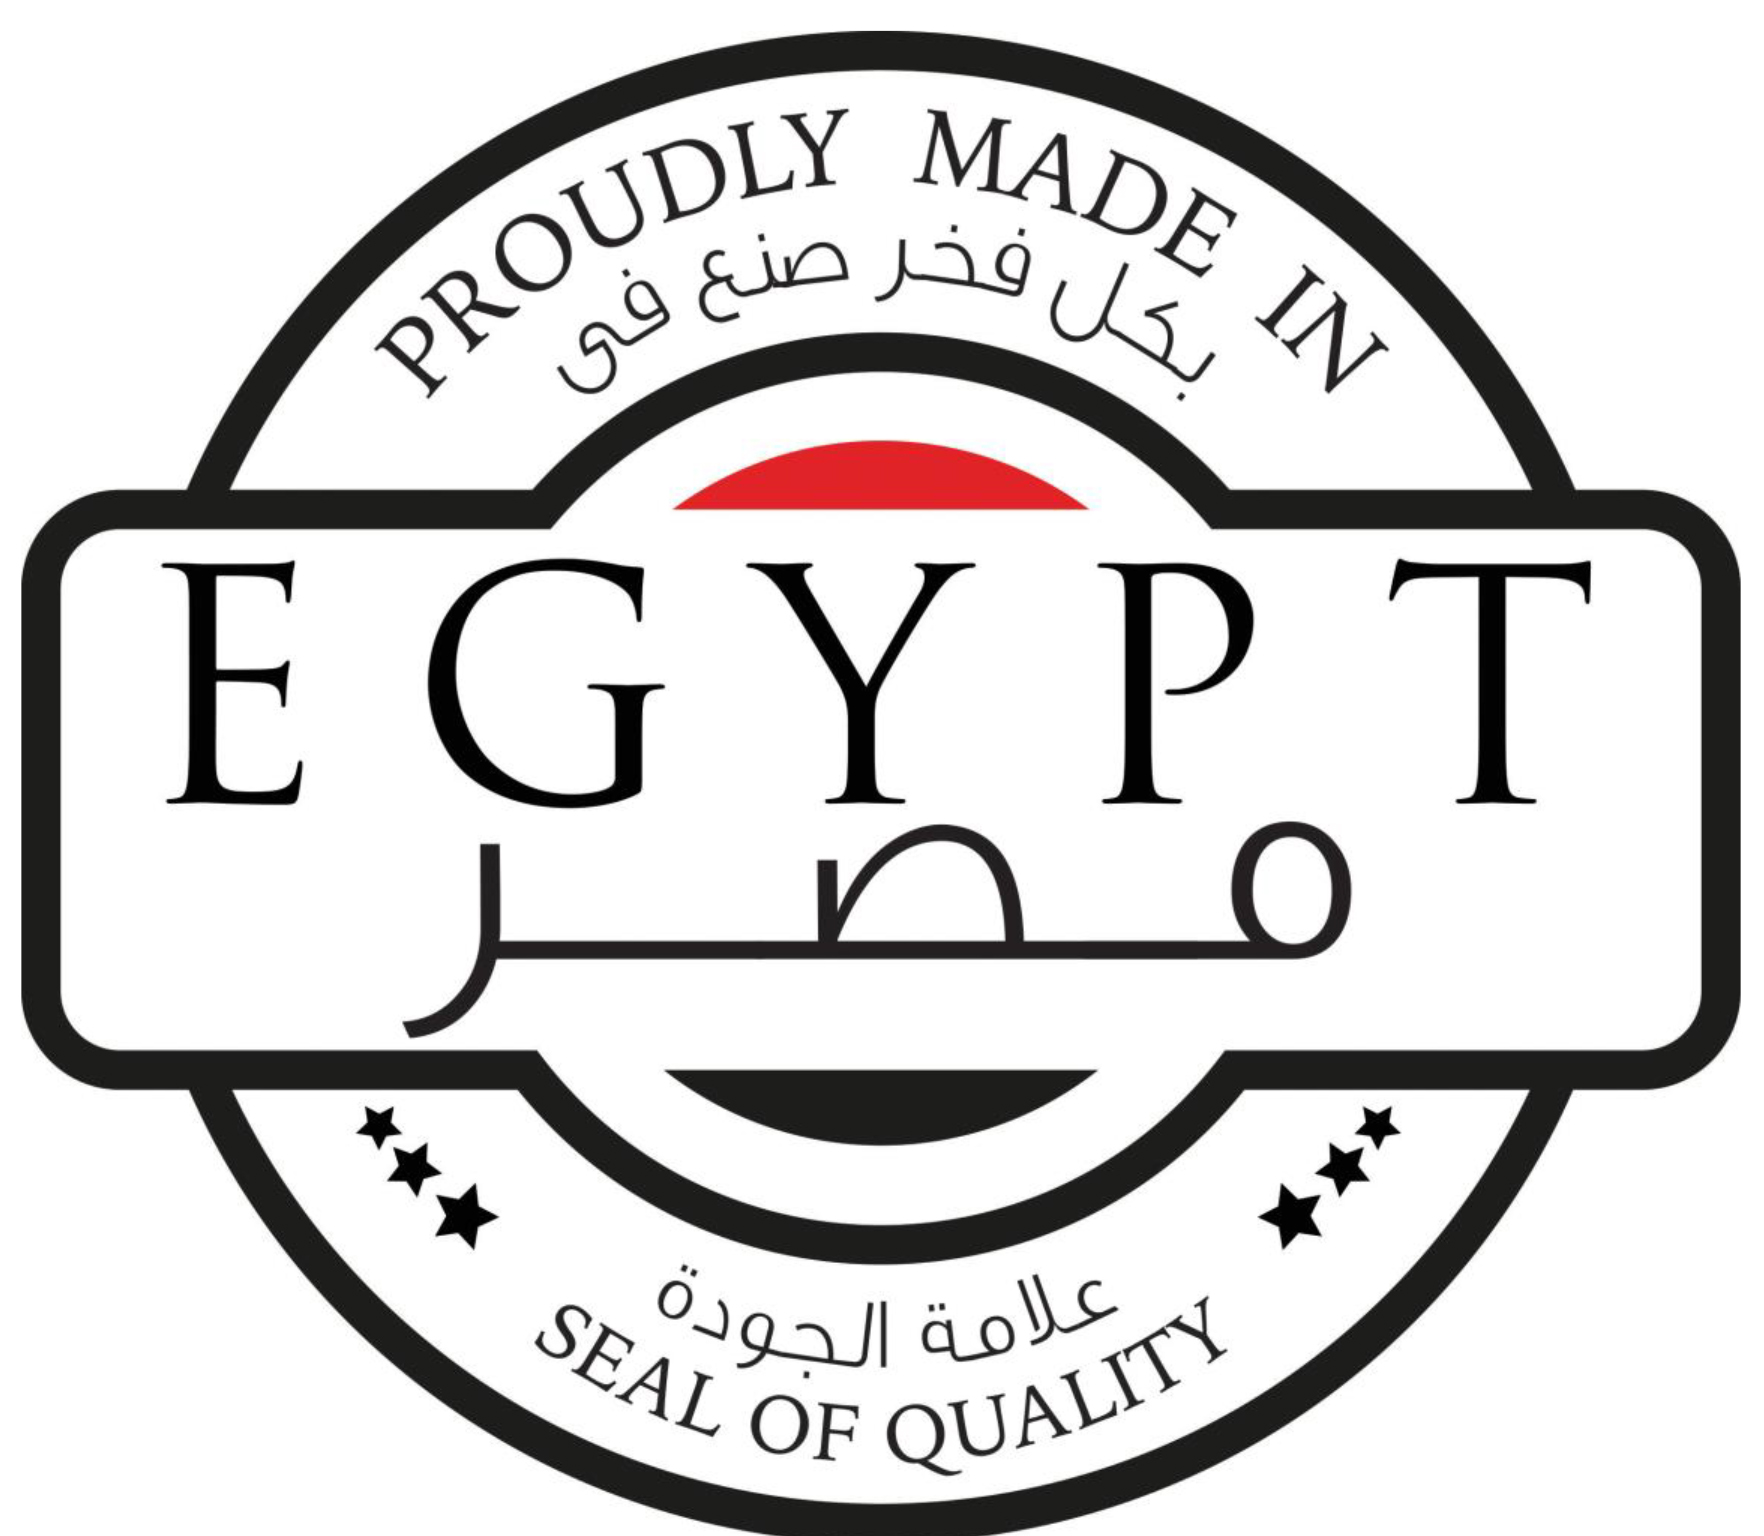 made in egypt